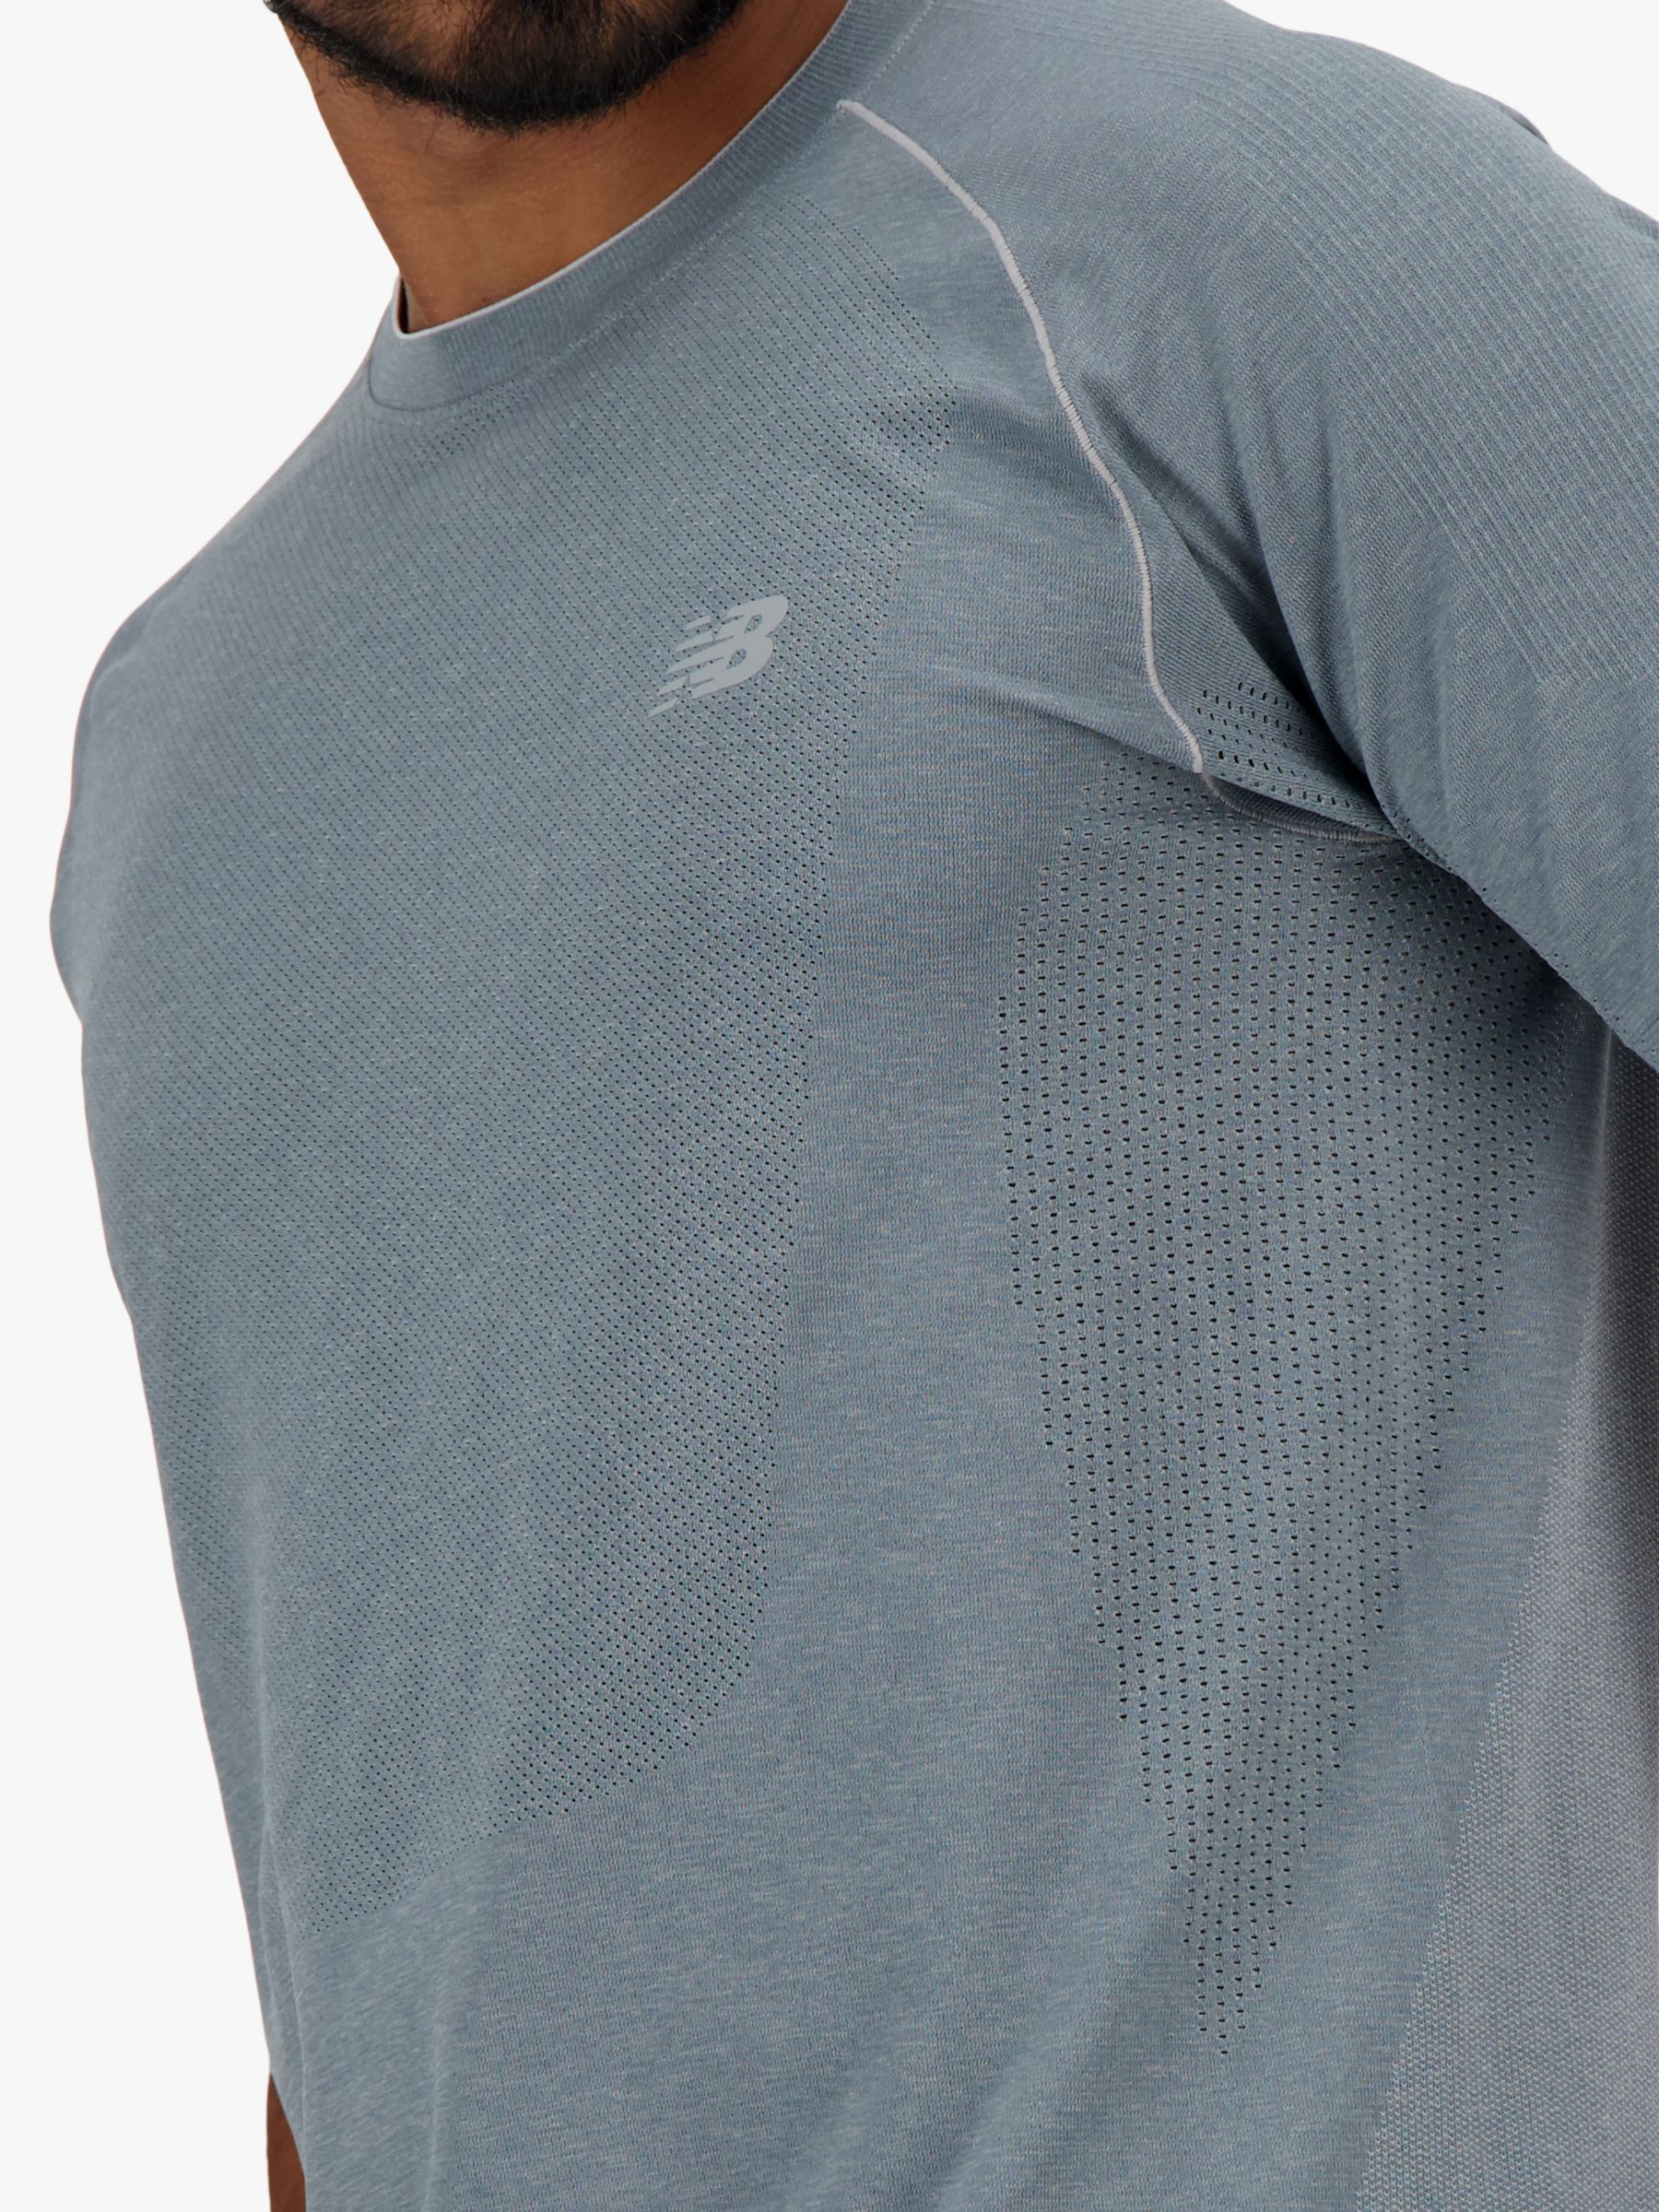 Buy New Balance Knit T-Shirt,  Athletic Grey Online at johnlewis.com